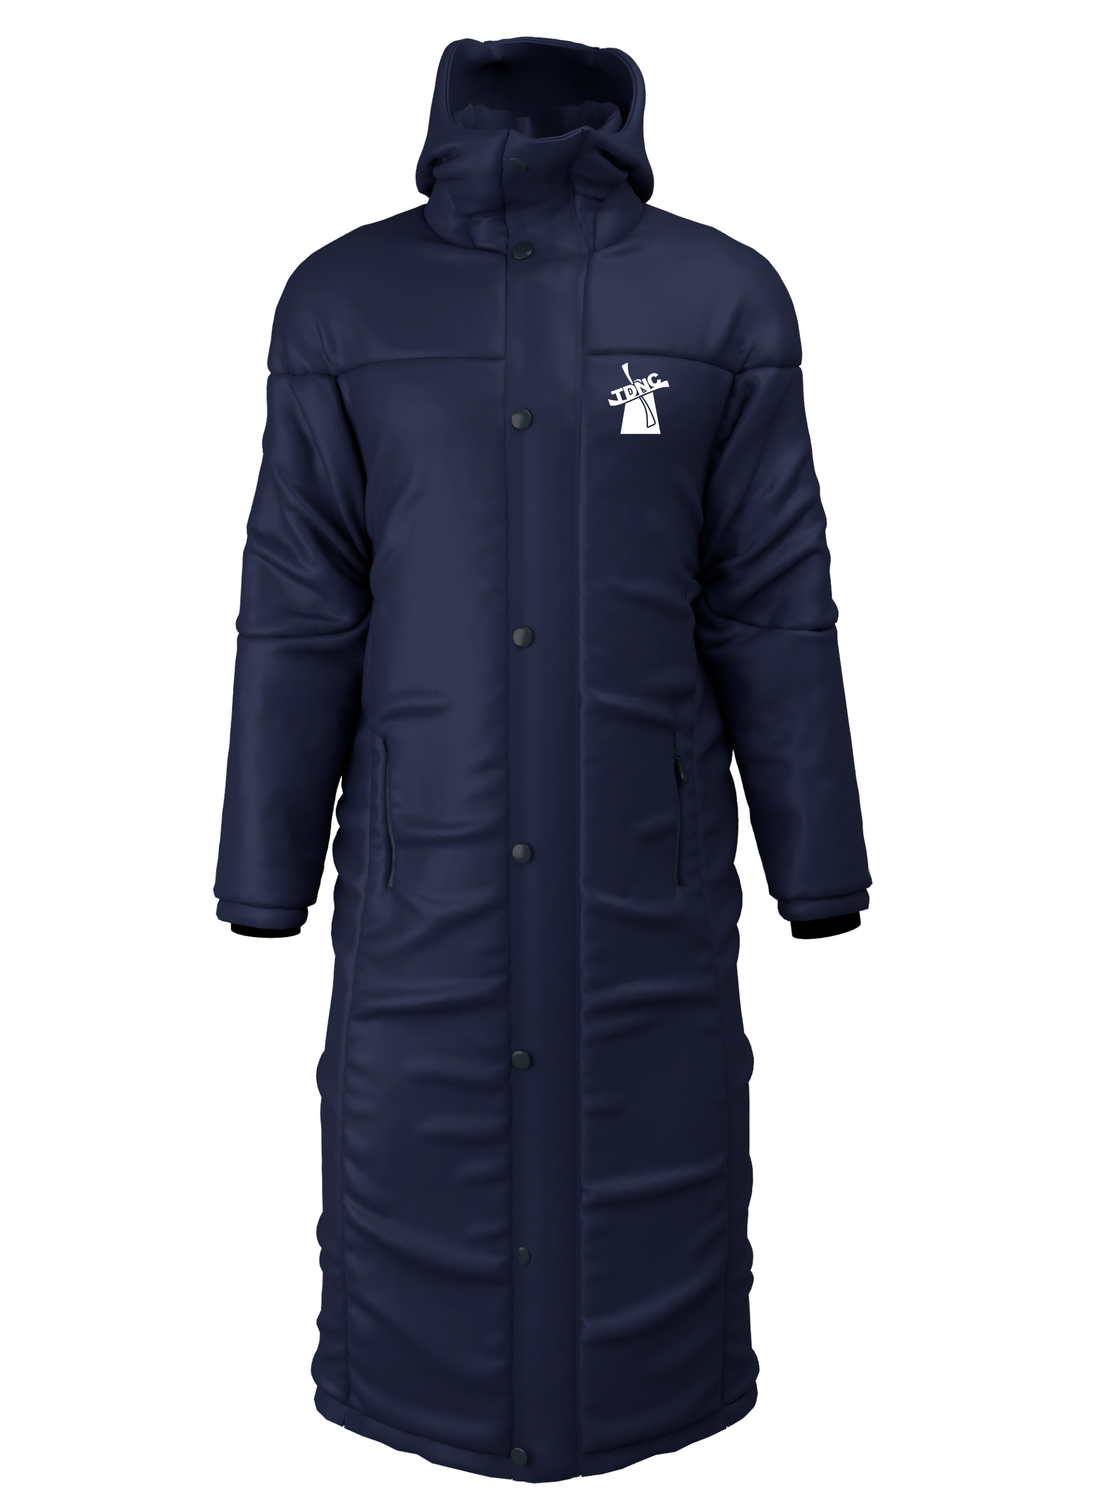 The Downs Bench coat